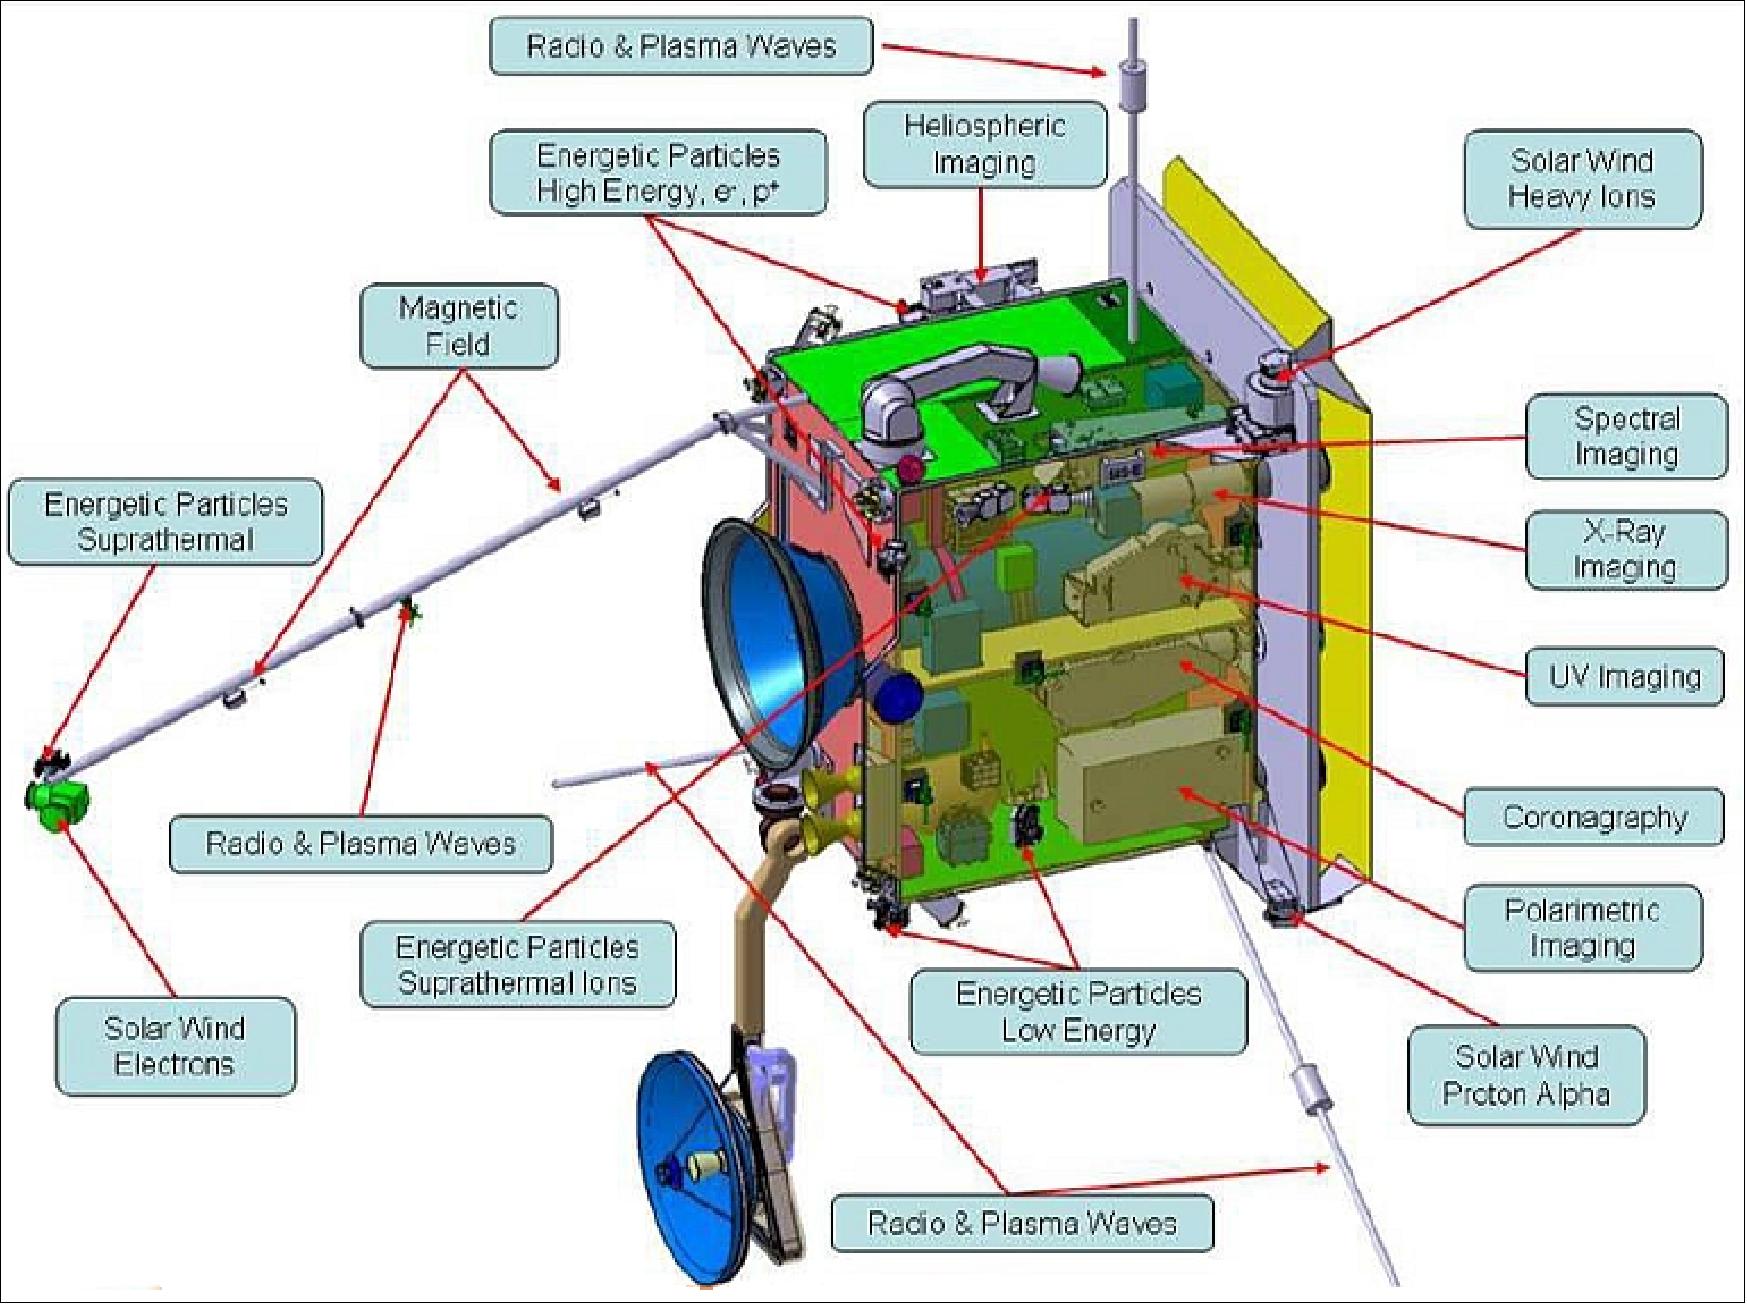 Figure 98: Solar Orbiter payload summary and locations on the spacecraft (image credit: Airbus DS) 72)